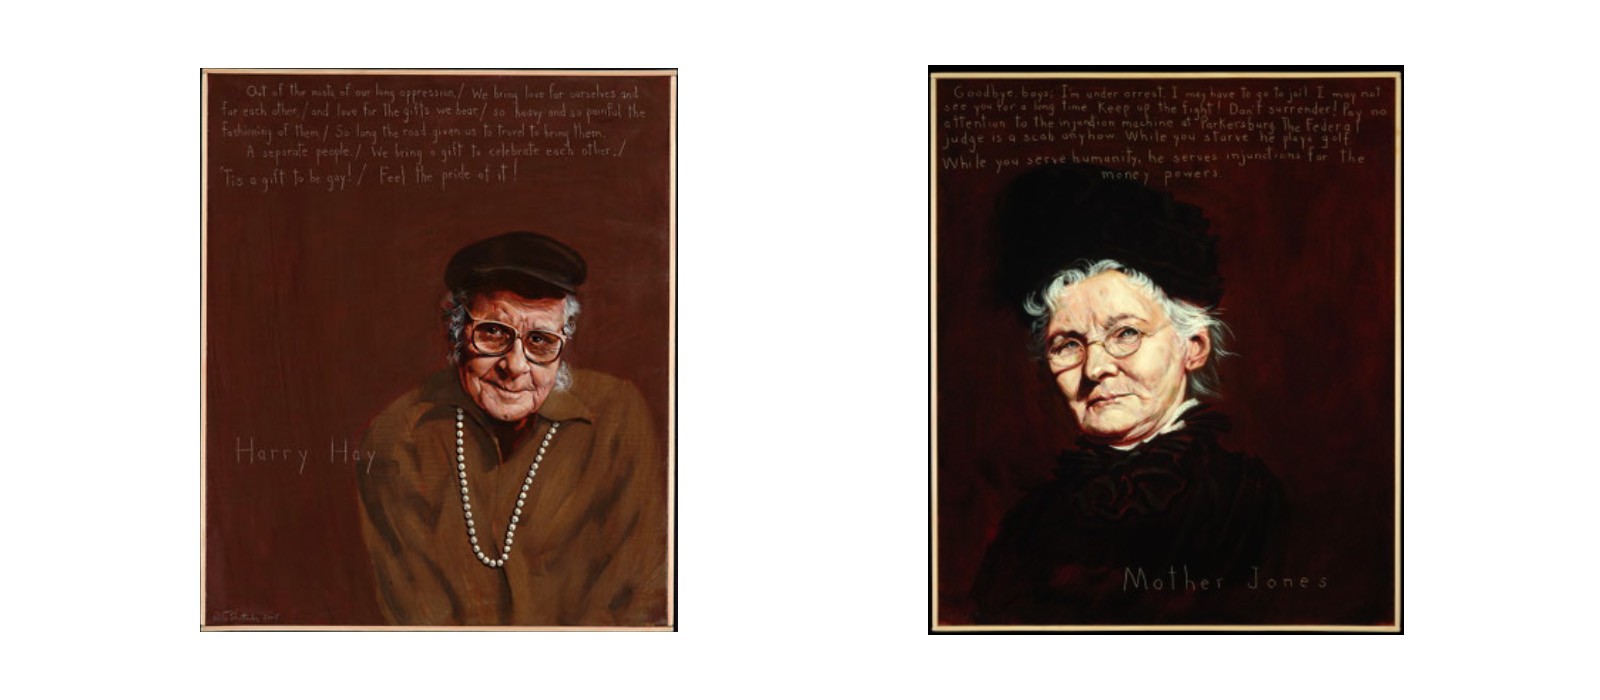 Paintings of Harry Hay and Mother Jones